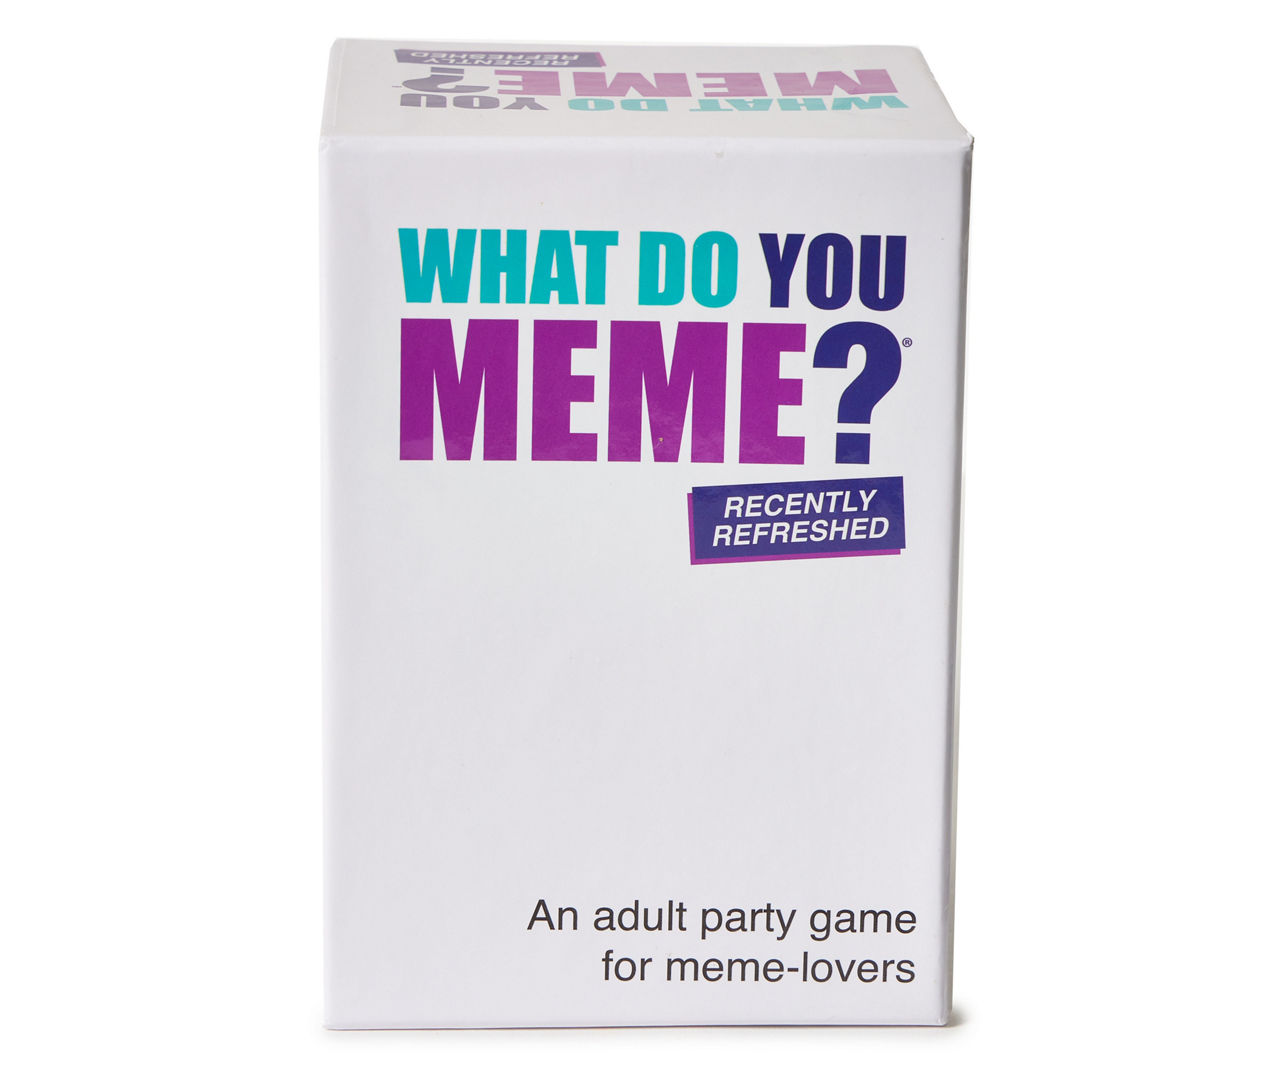 What Do You Meme? Core Game - The Hilarious Adult Party Game for